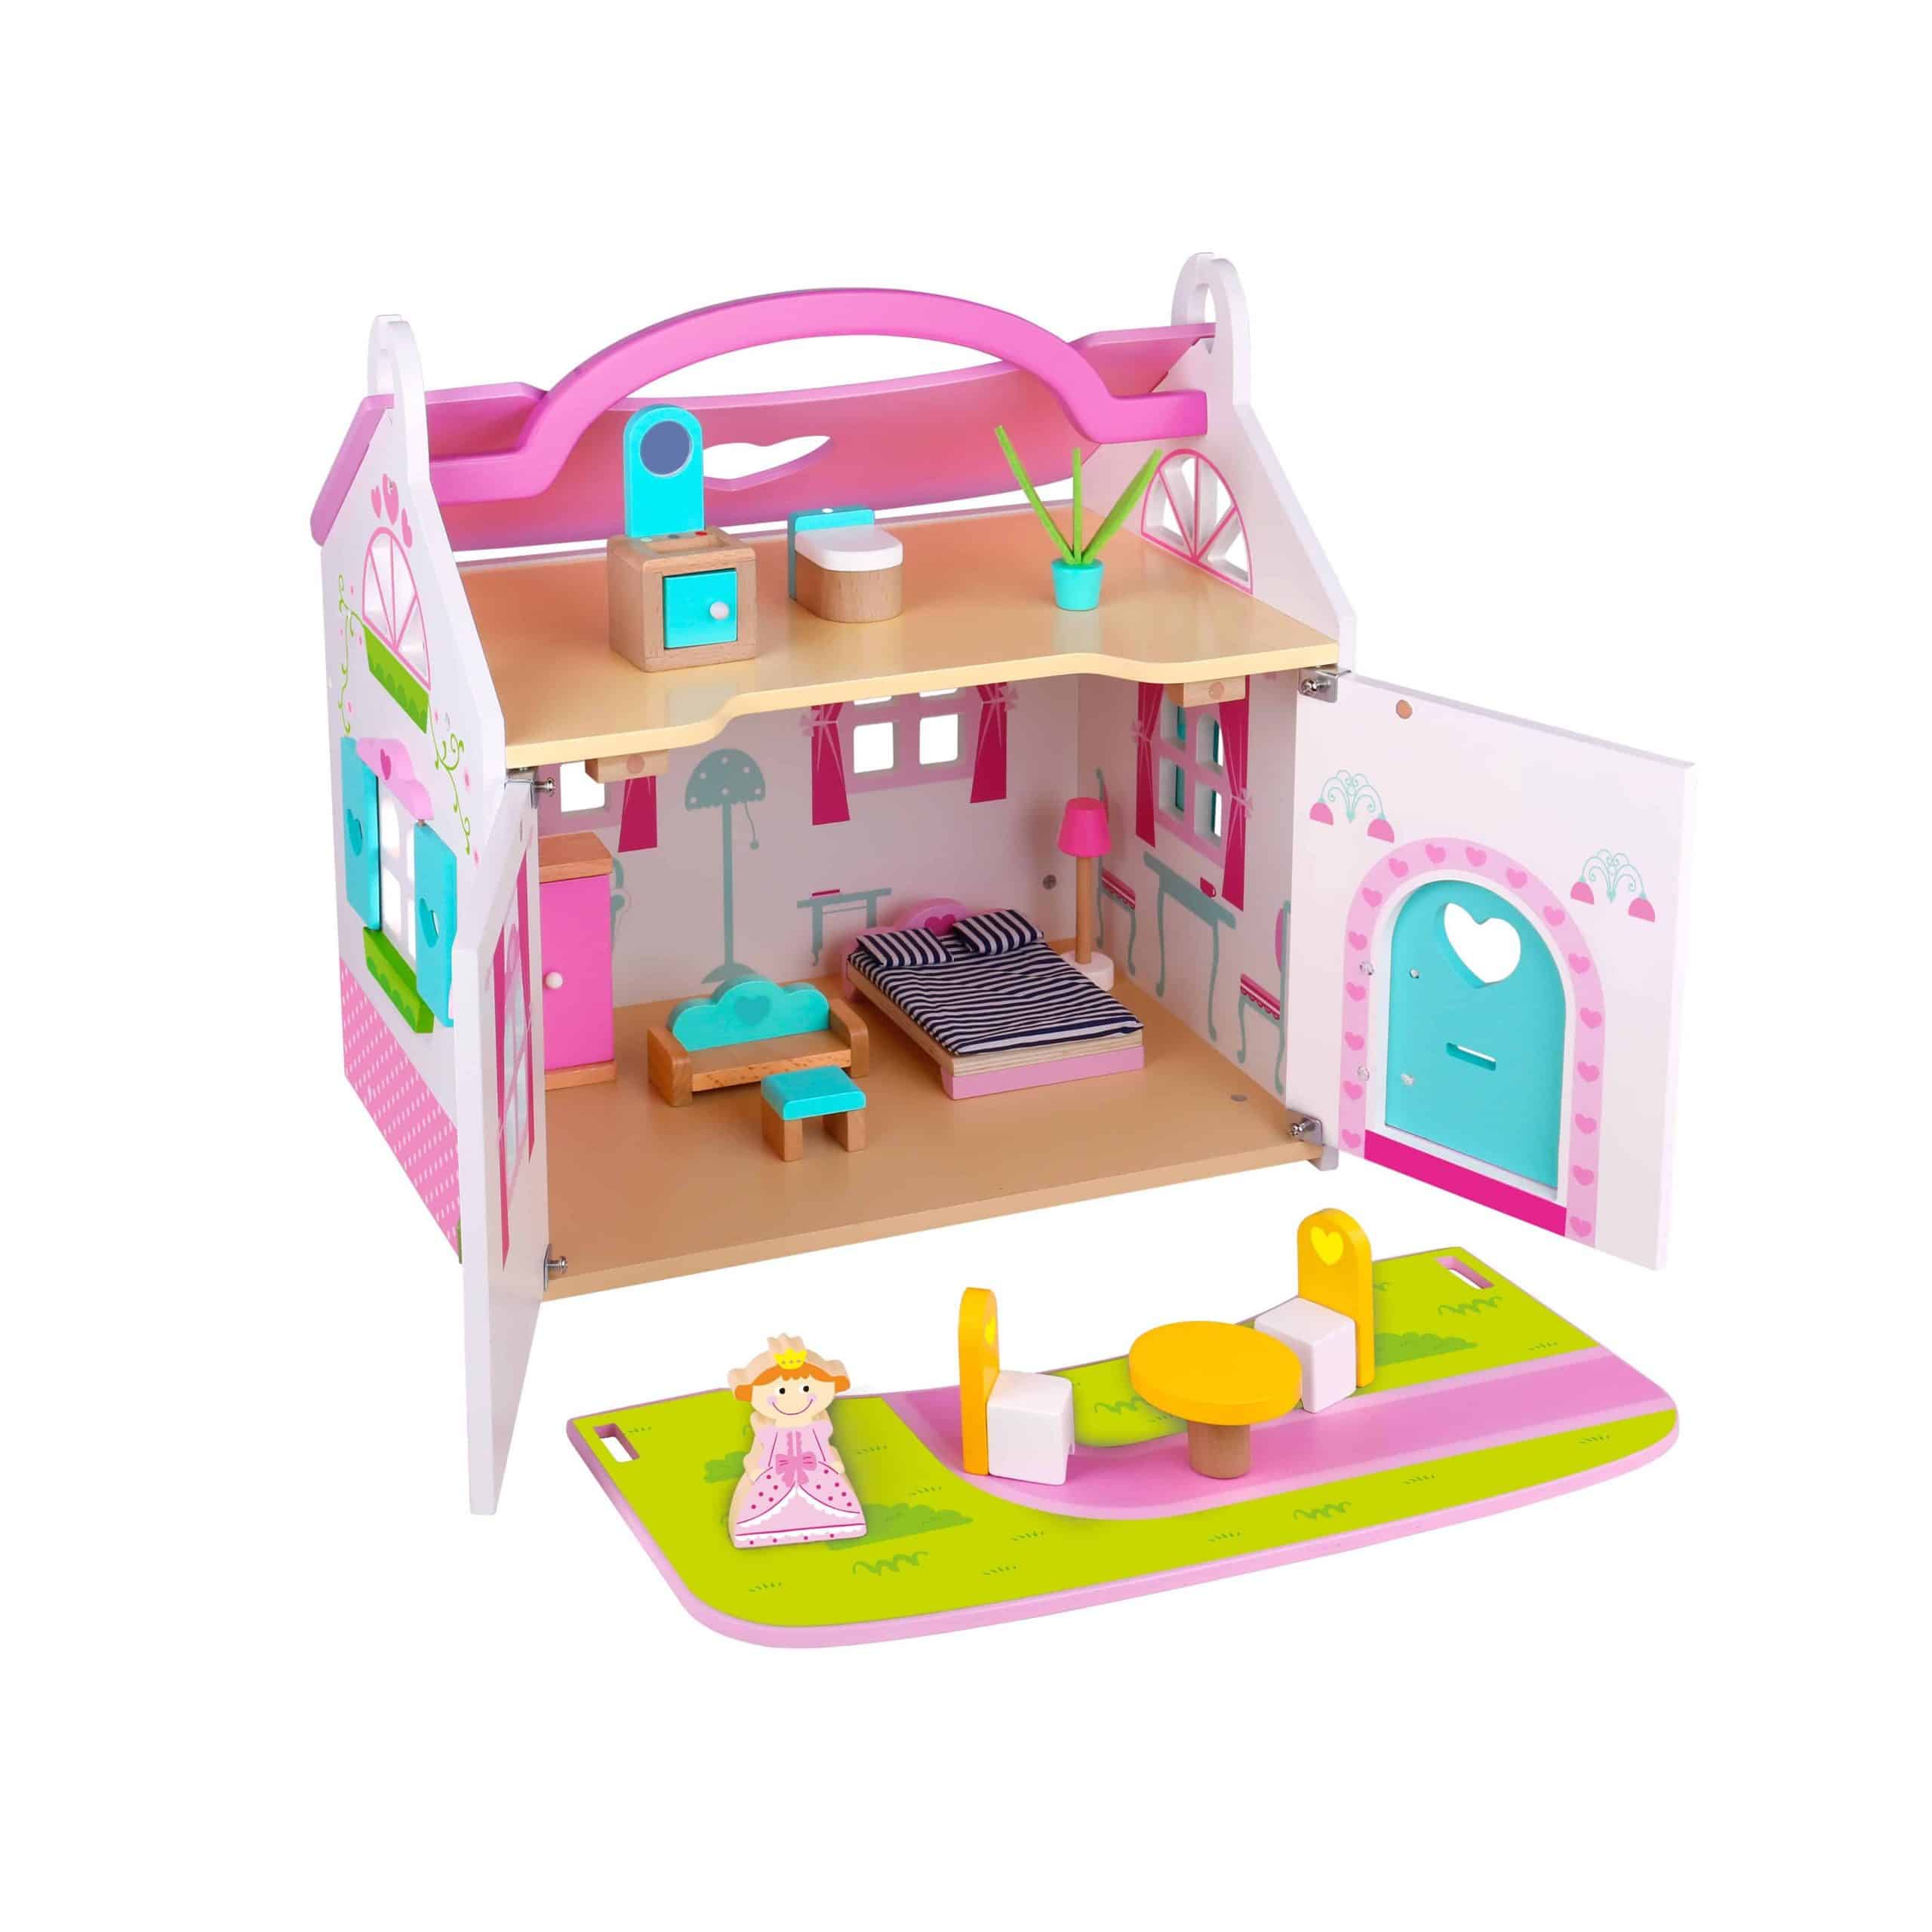 Doll House Tooky Toy 1598155590 scaled | Trio Kids Singapore | December, 2022